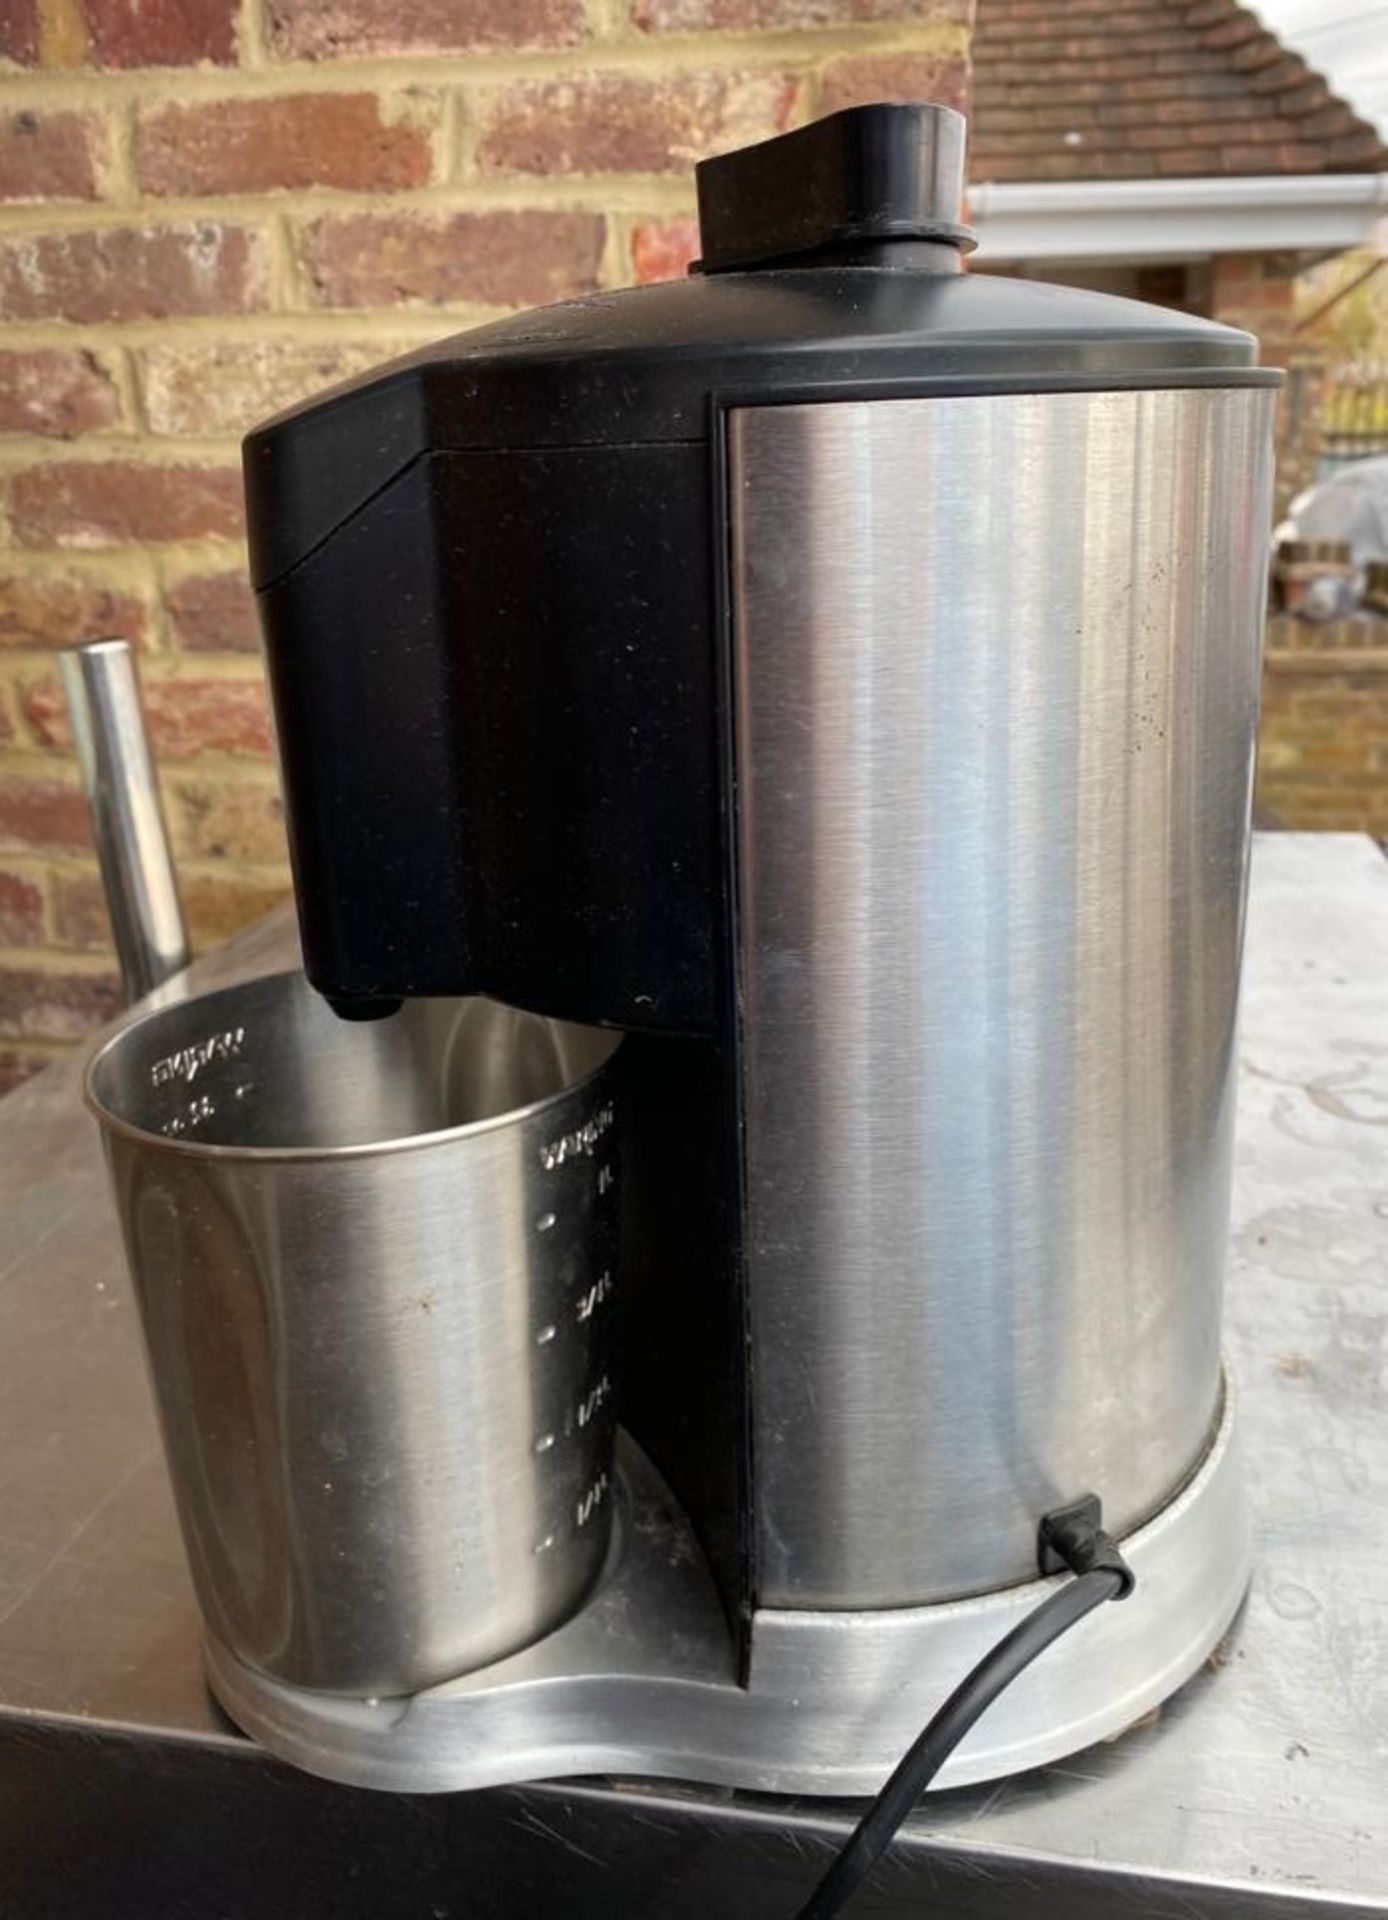 1 x Waring Kitchen Classics Juice Extractor With Stainless Steel Finish - CL667 - Location: - Image 3 of 3